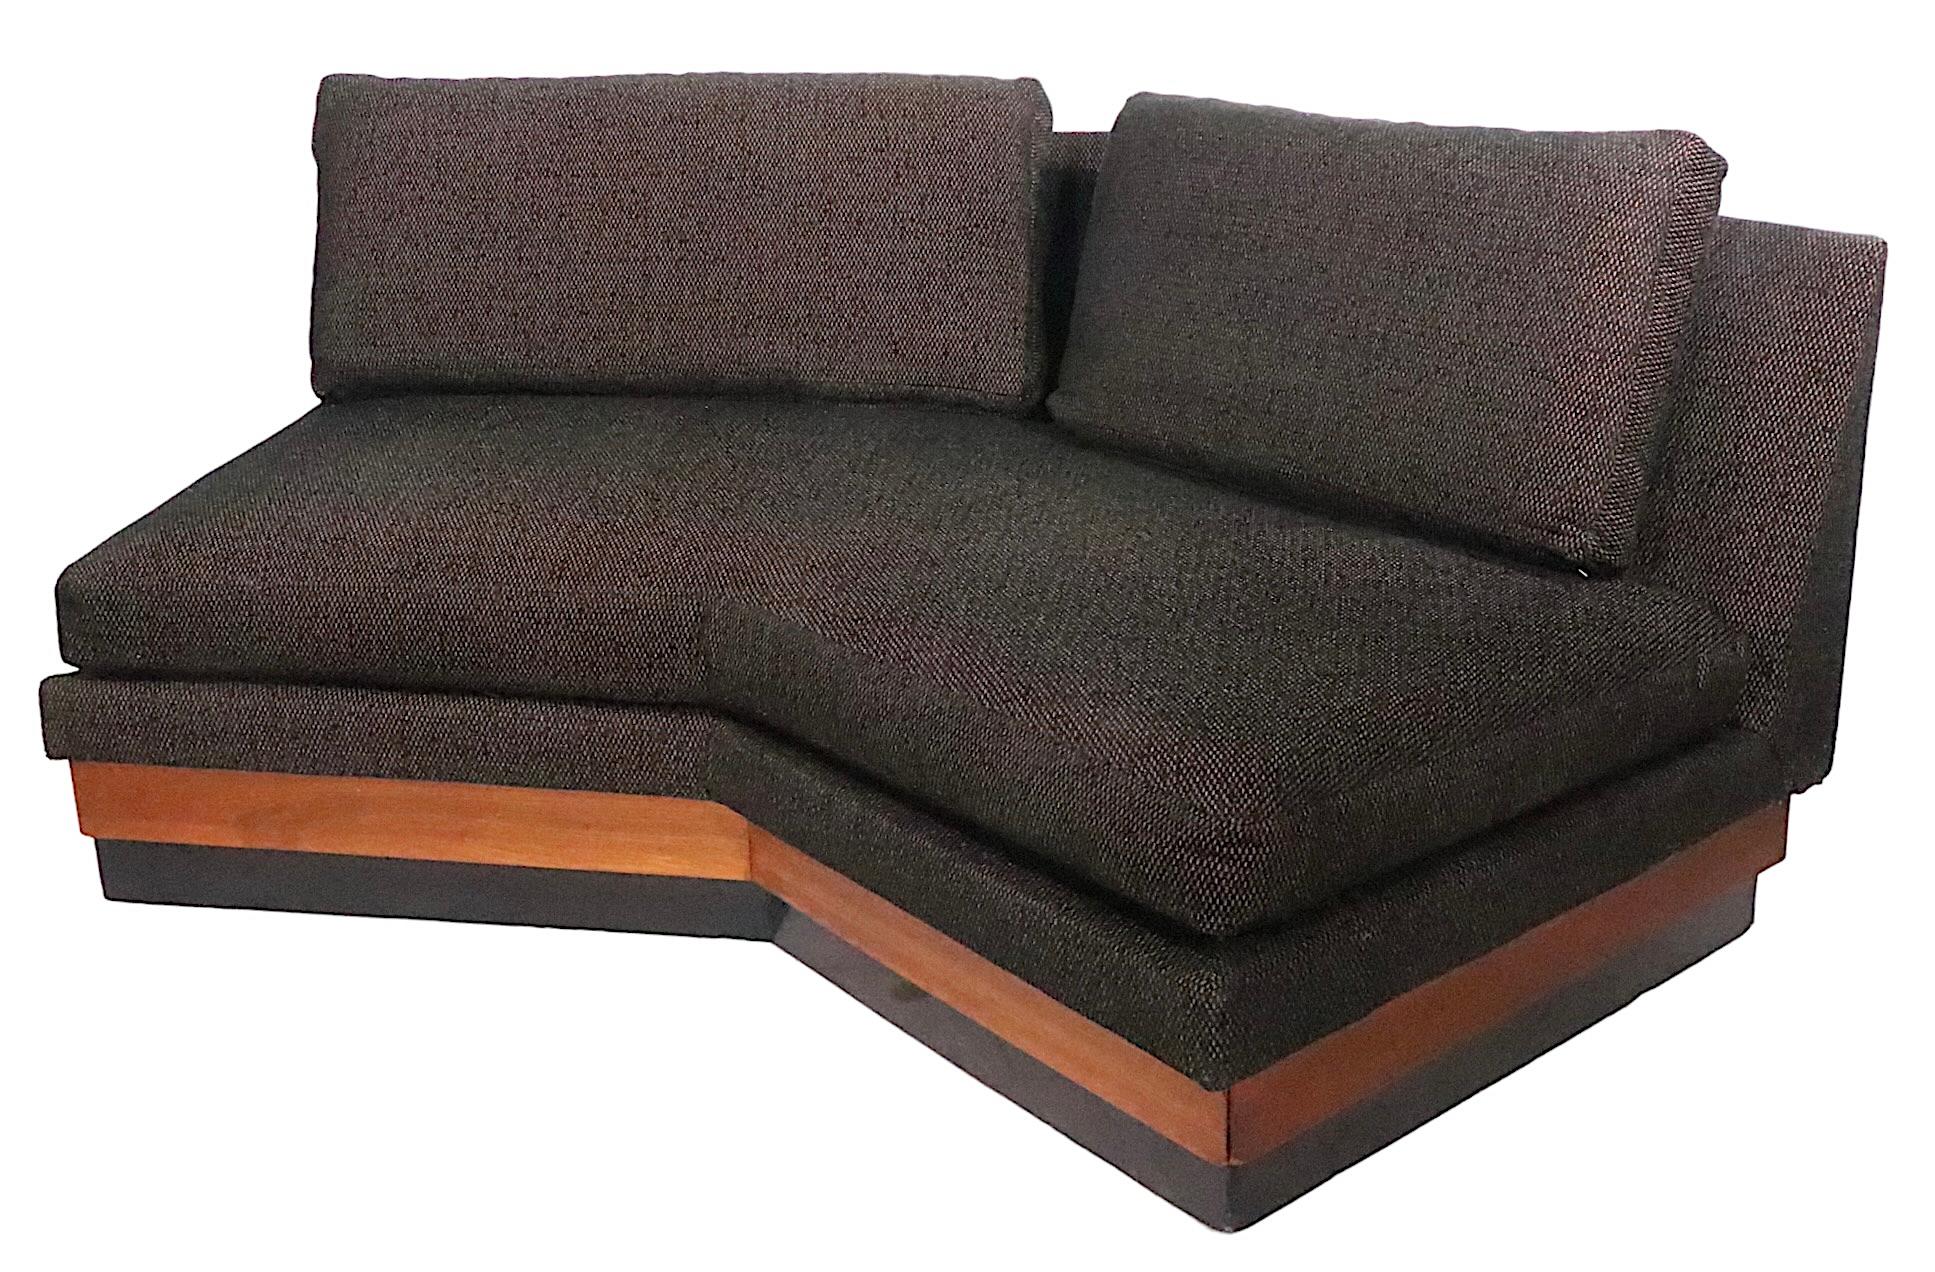 Architectural two piece sectional sofa, designed by Adrian Pearsall for Craft Associates. The sofa features an angled section, which has a storage cabinet on its end, with a drop down door cover. The other section is straight, making it possible to